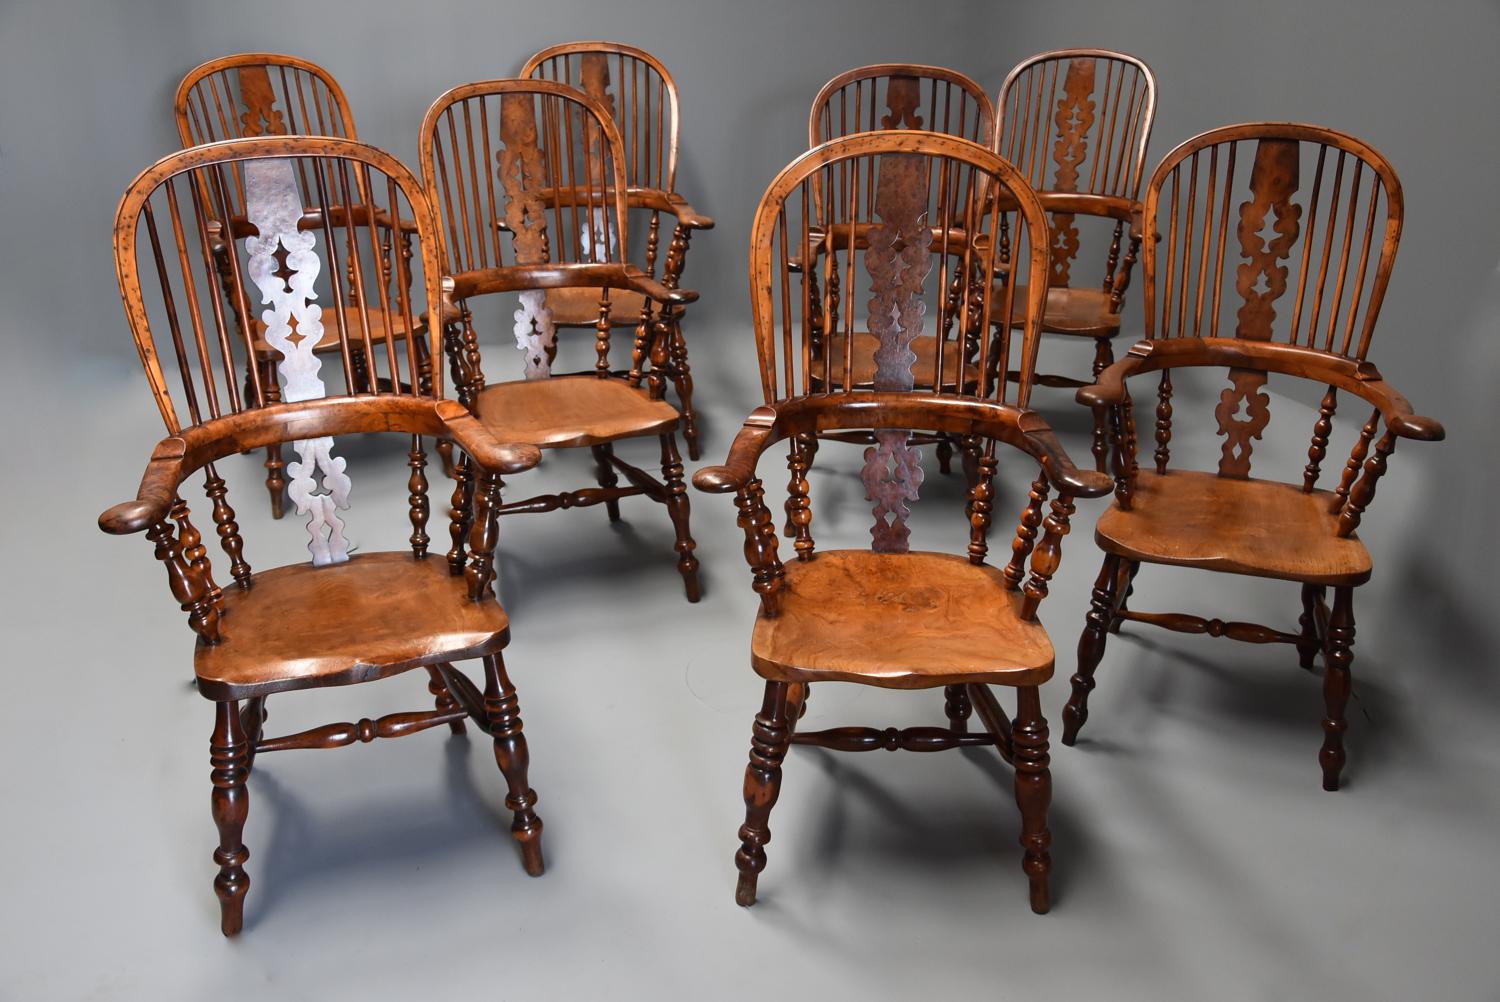 Superb set of eight 19thc broad arm burr yew high back Windsor chairs